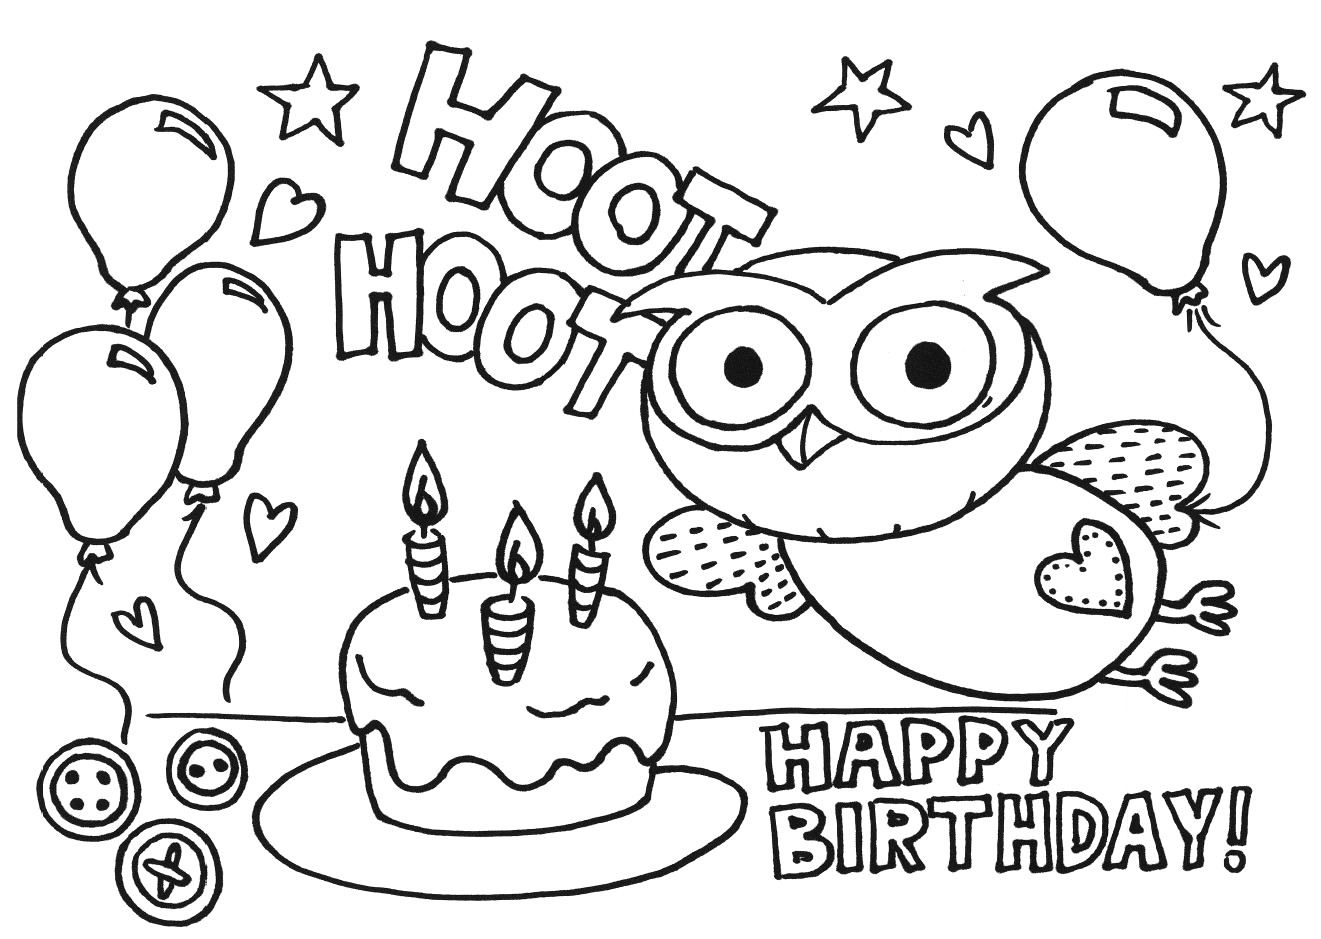 7723906 full peppa pig happy birthday coloring page happy birthday daddy coloring page elegant free printable happy gif